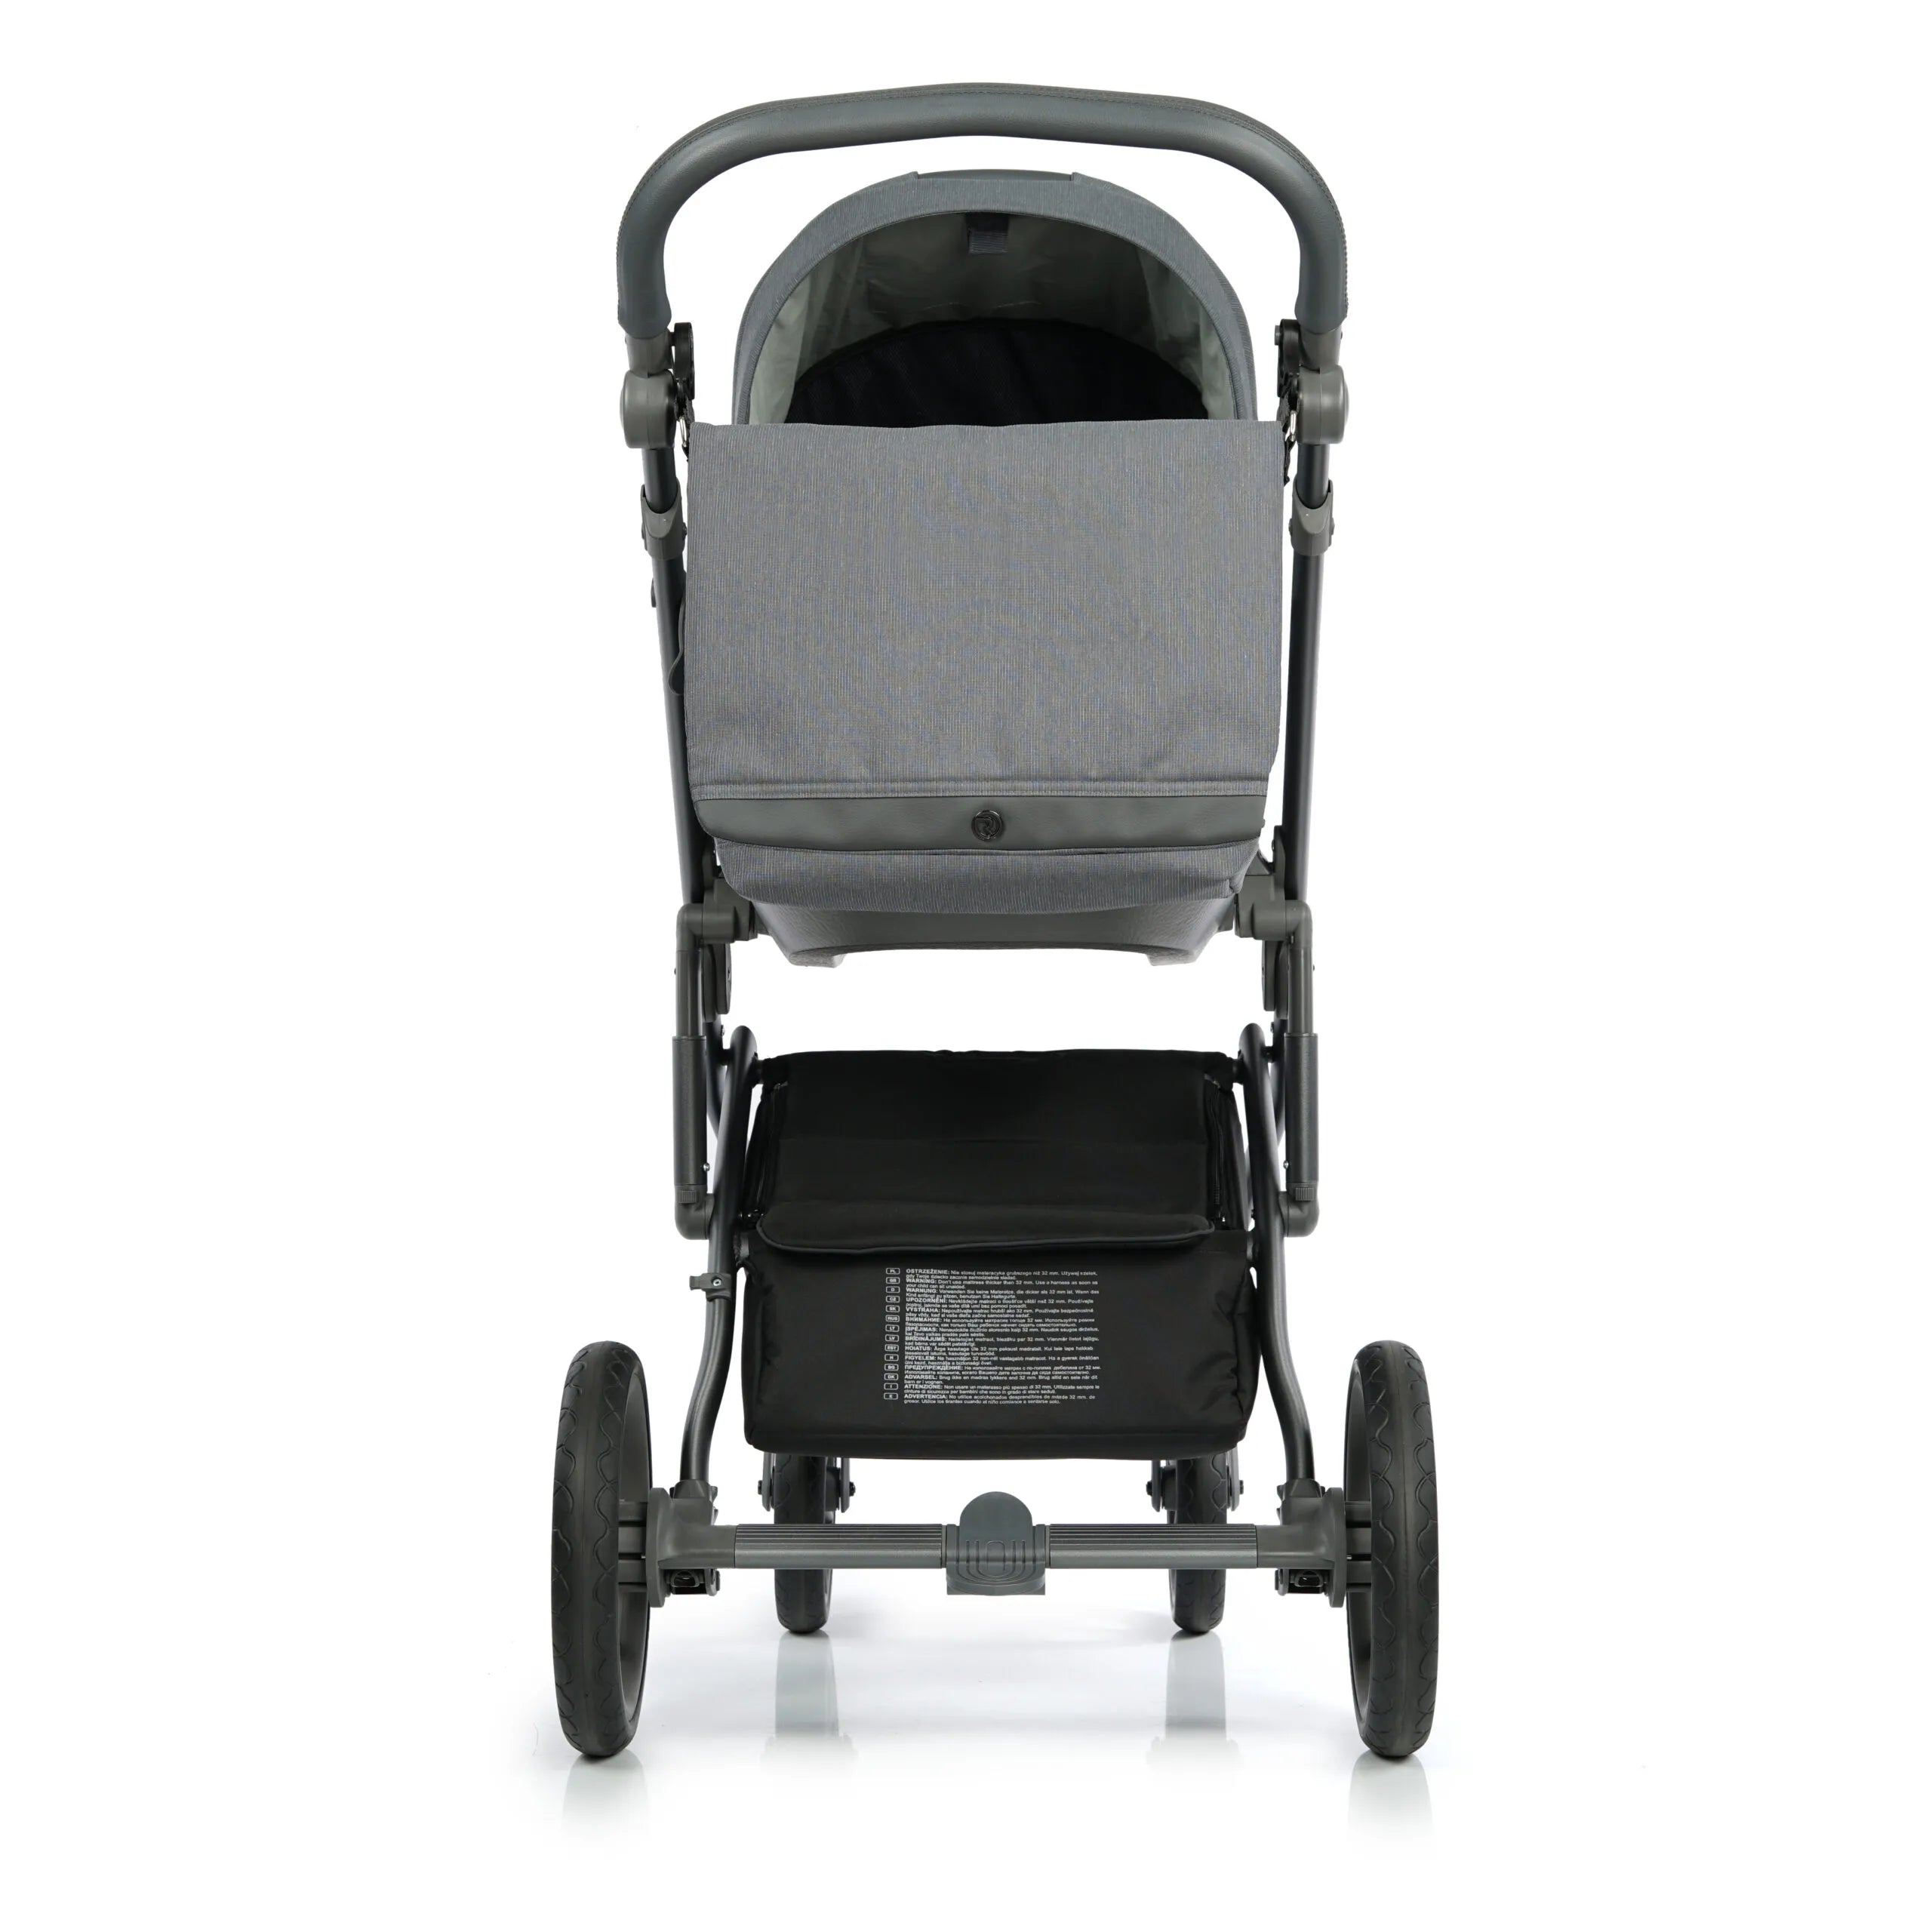 Roan BLOOM baby stroller 2 in 1, carry cot and stroller, color Titanium